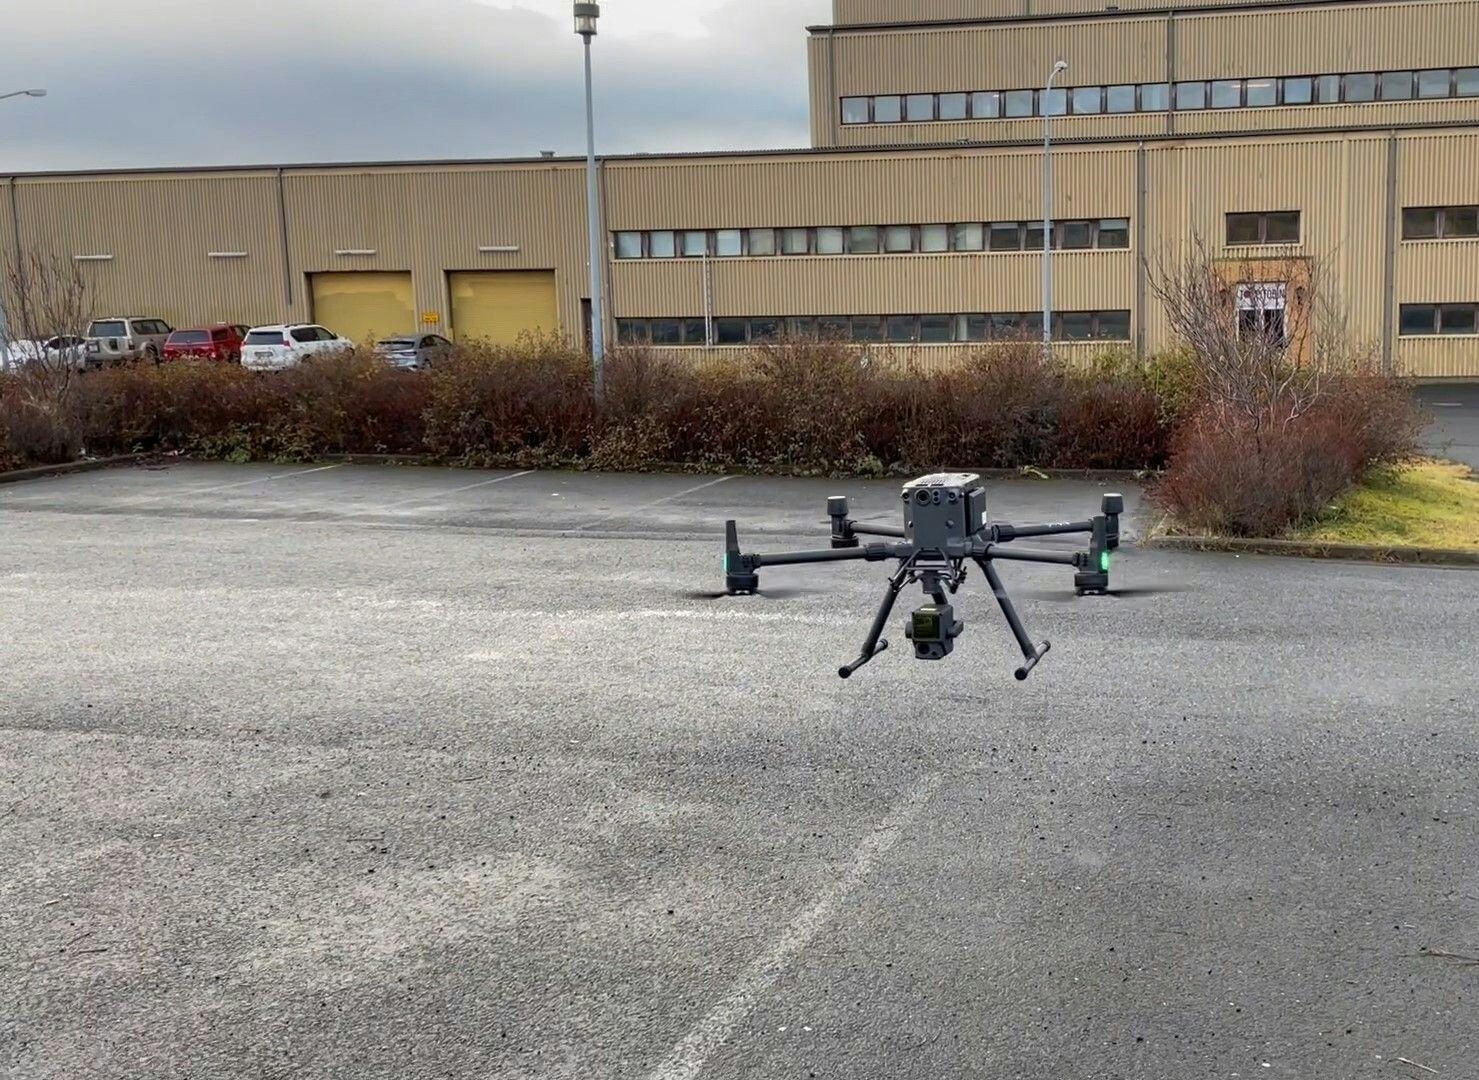 A black drone mid flight in front of an industrial building